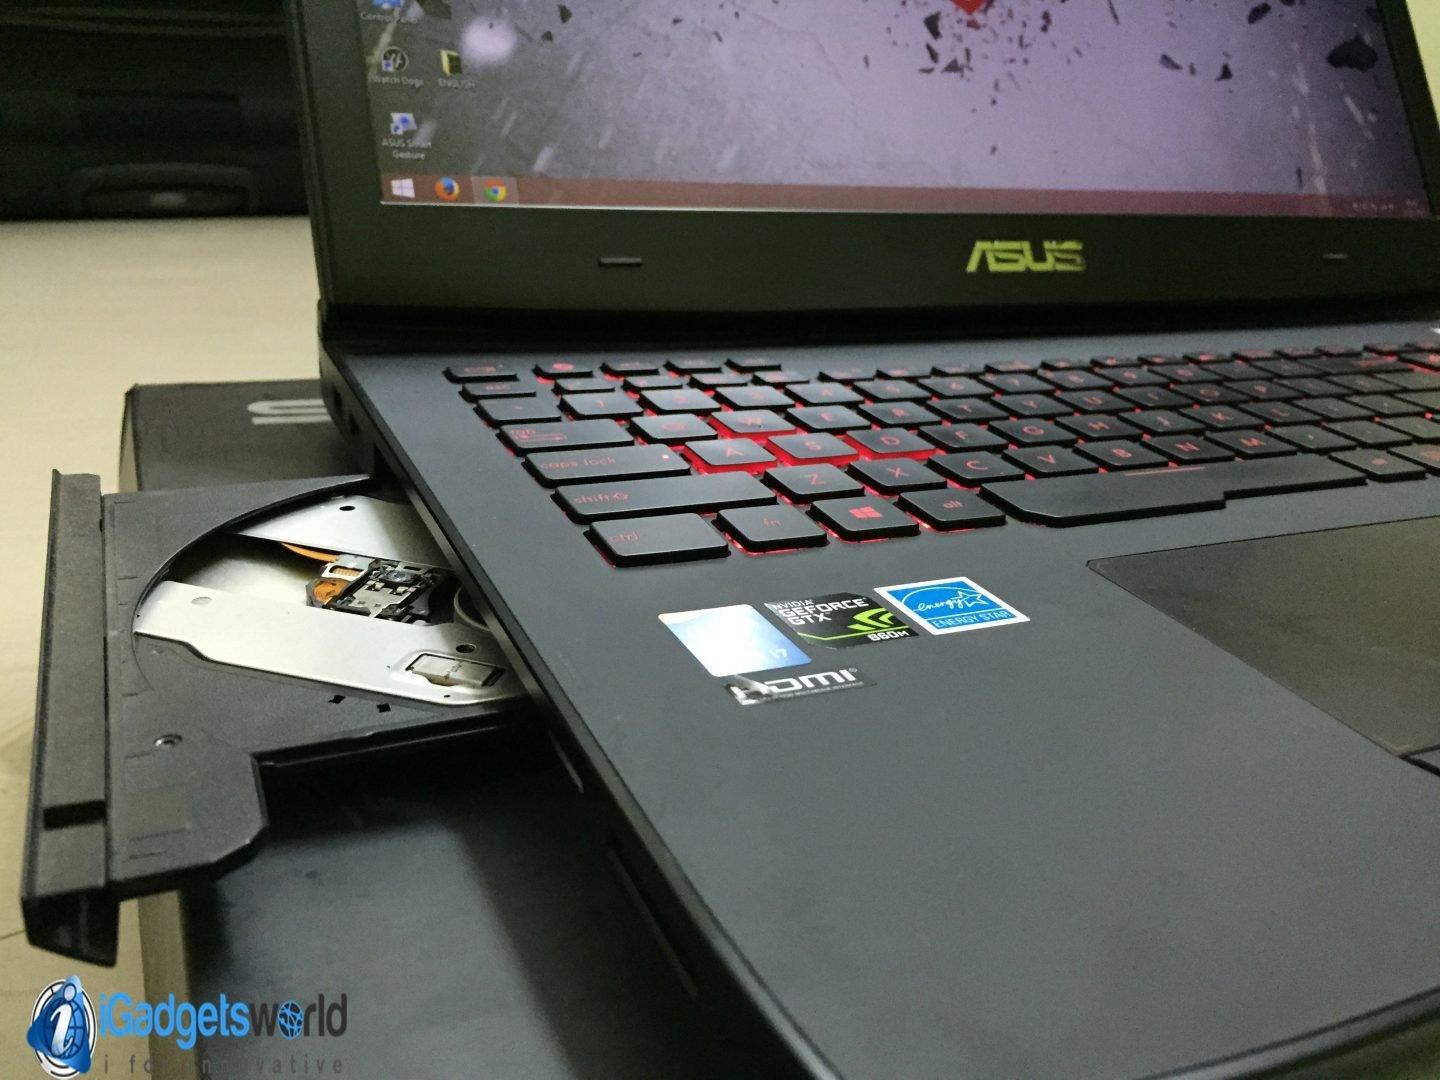 Asus ROG G751J Review: A Slightly Overpriced Ultra High-End Gaming Laptop - 16